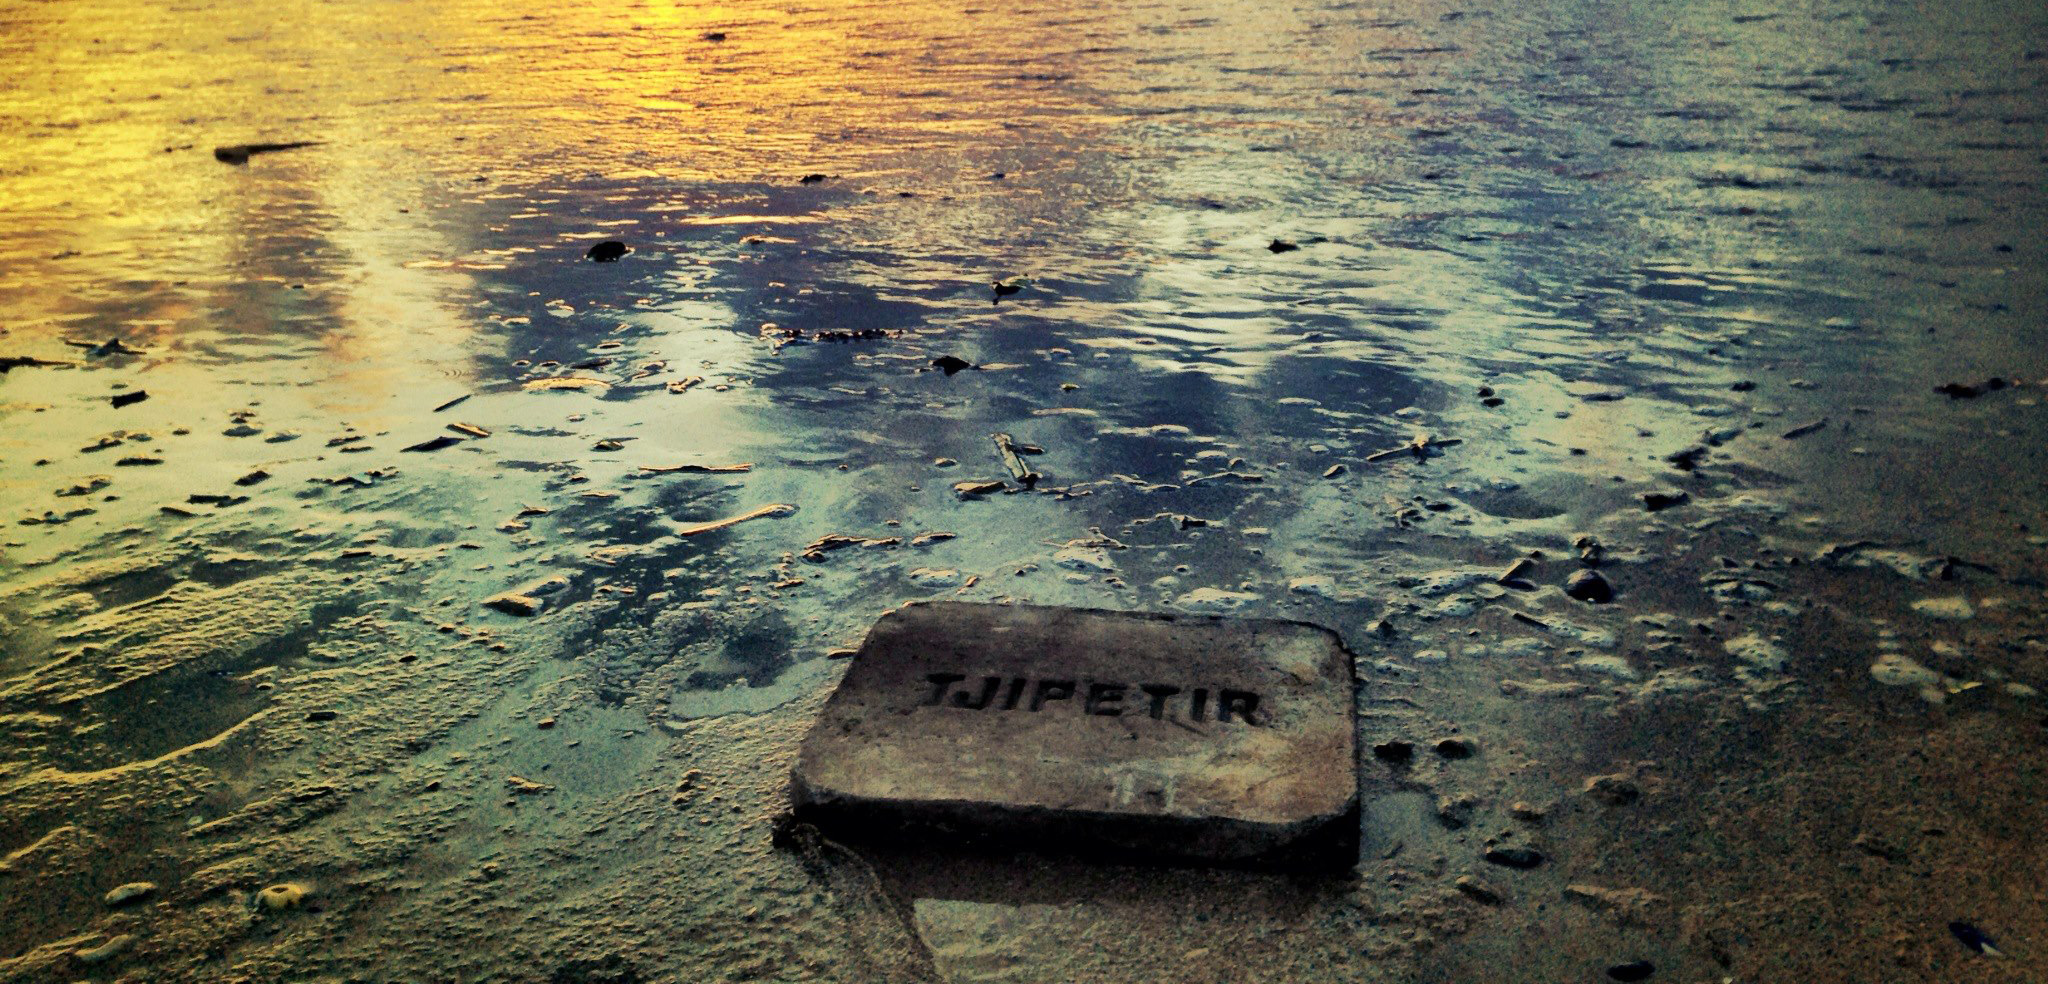 This rubbery block stamped with “Tjipetir” is one of many that have washed up on European beaches since 2012. Photo by Tom Quinn Williams/Tjipetir Mystery